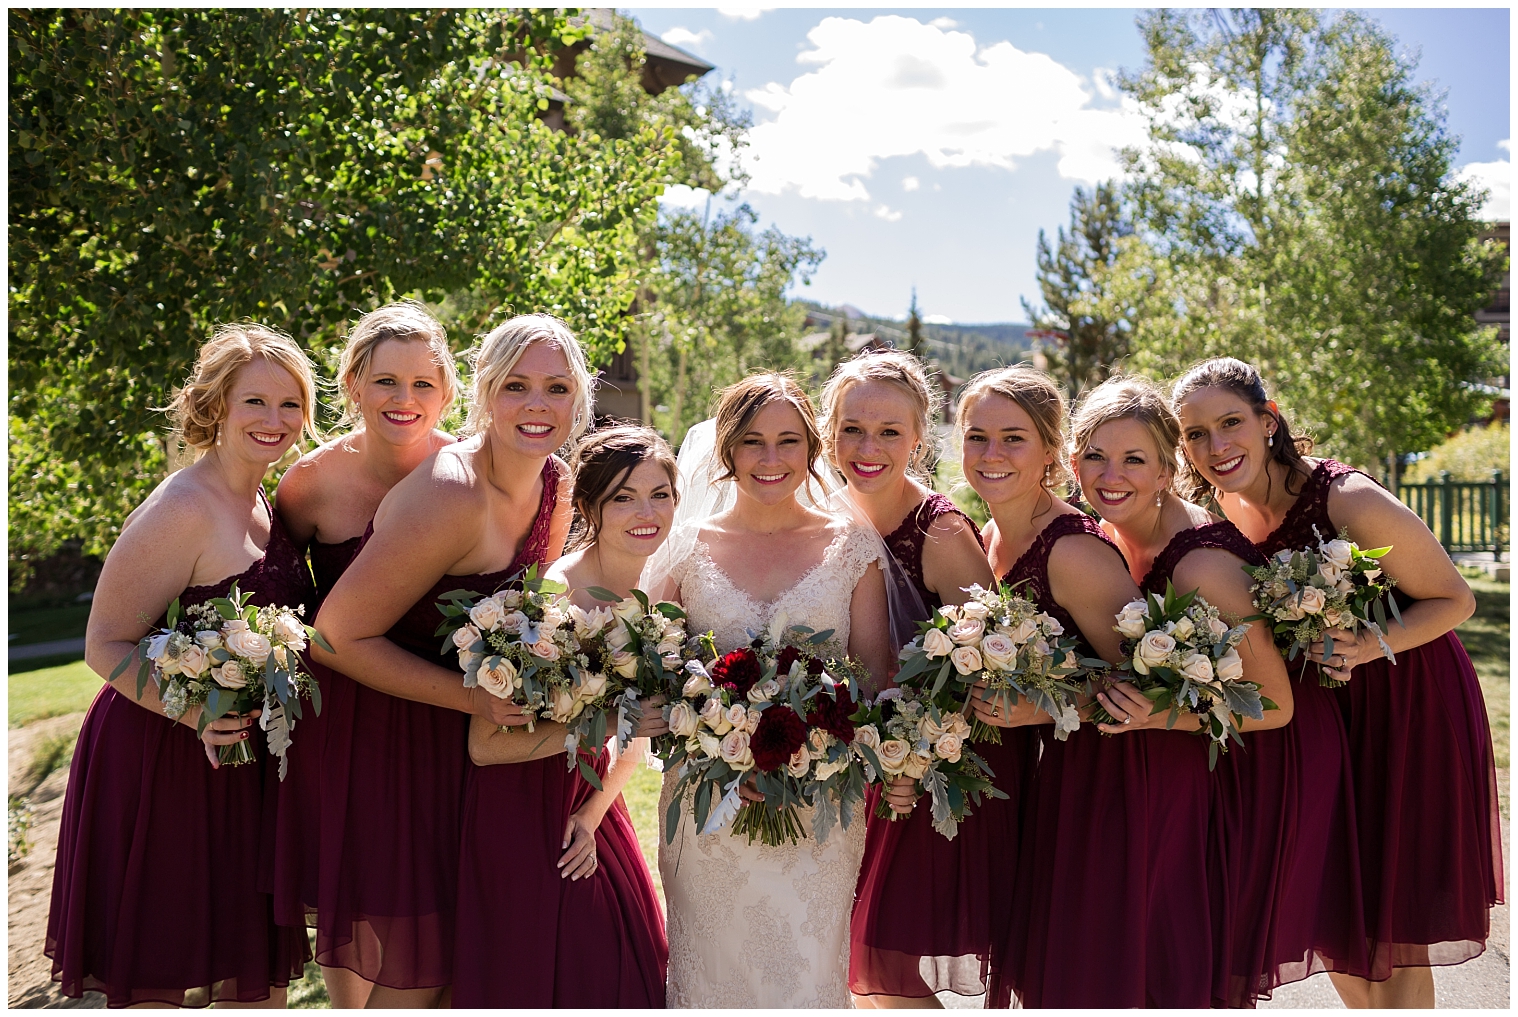 On her Copper Mountain wedding day, the bride poses with her bridesmaids wearing knee-length burgundy dresses.